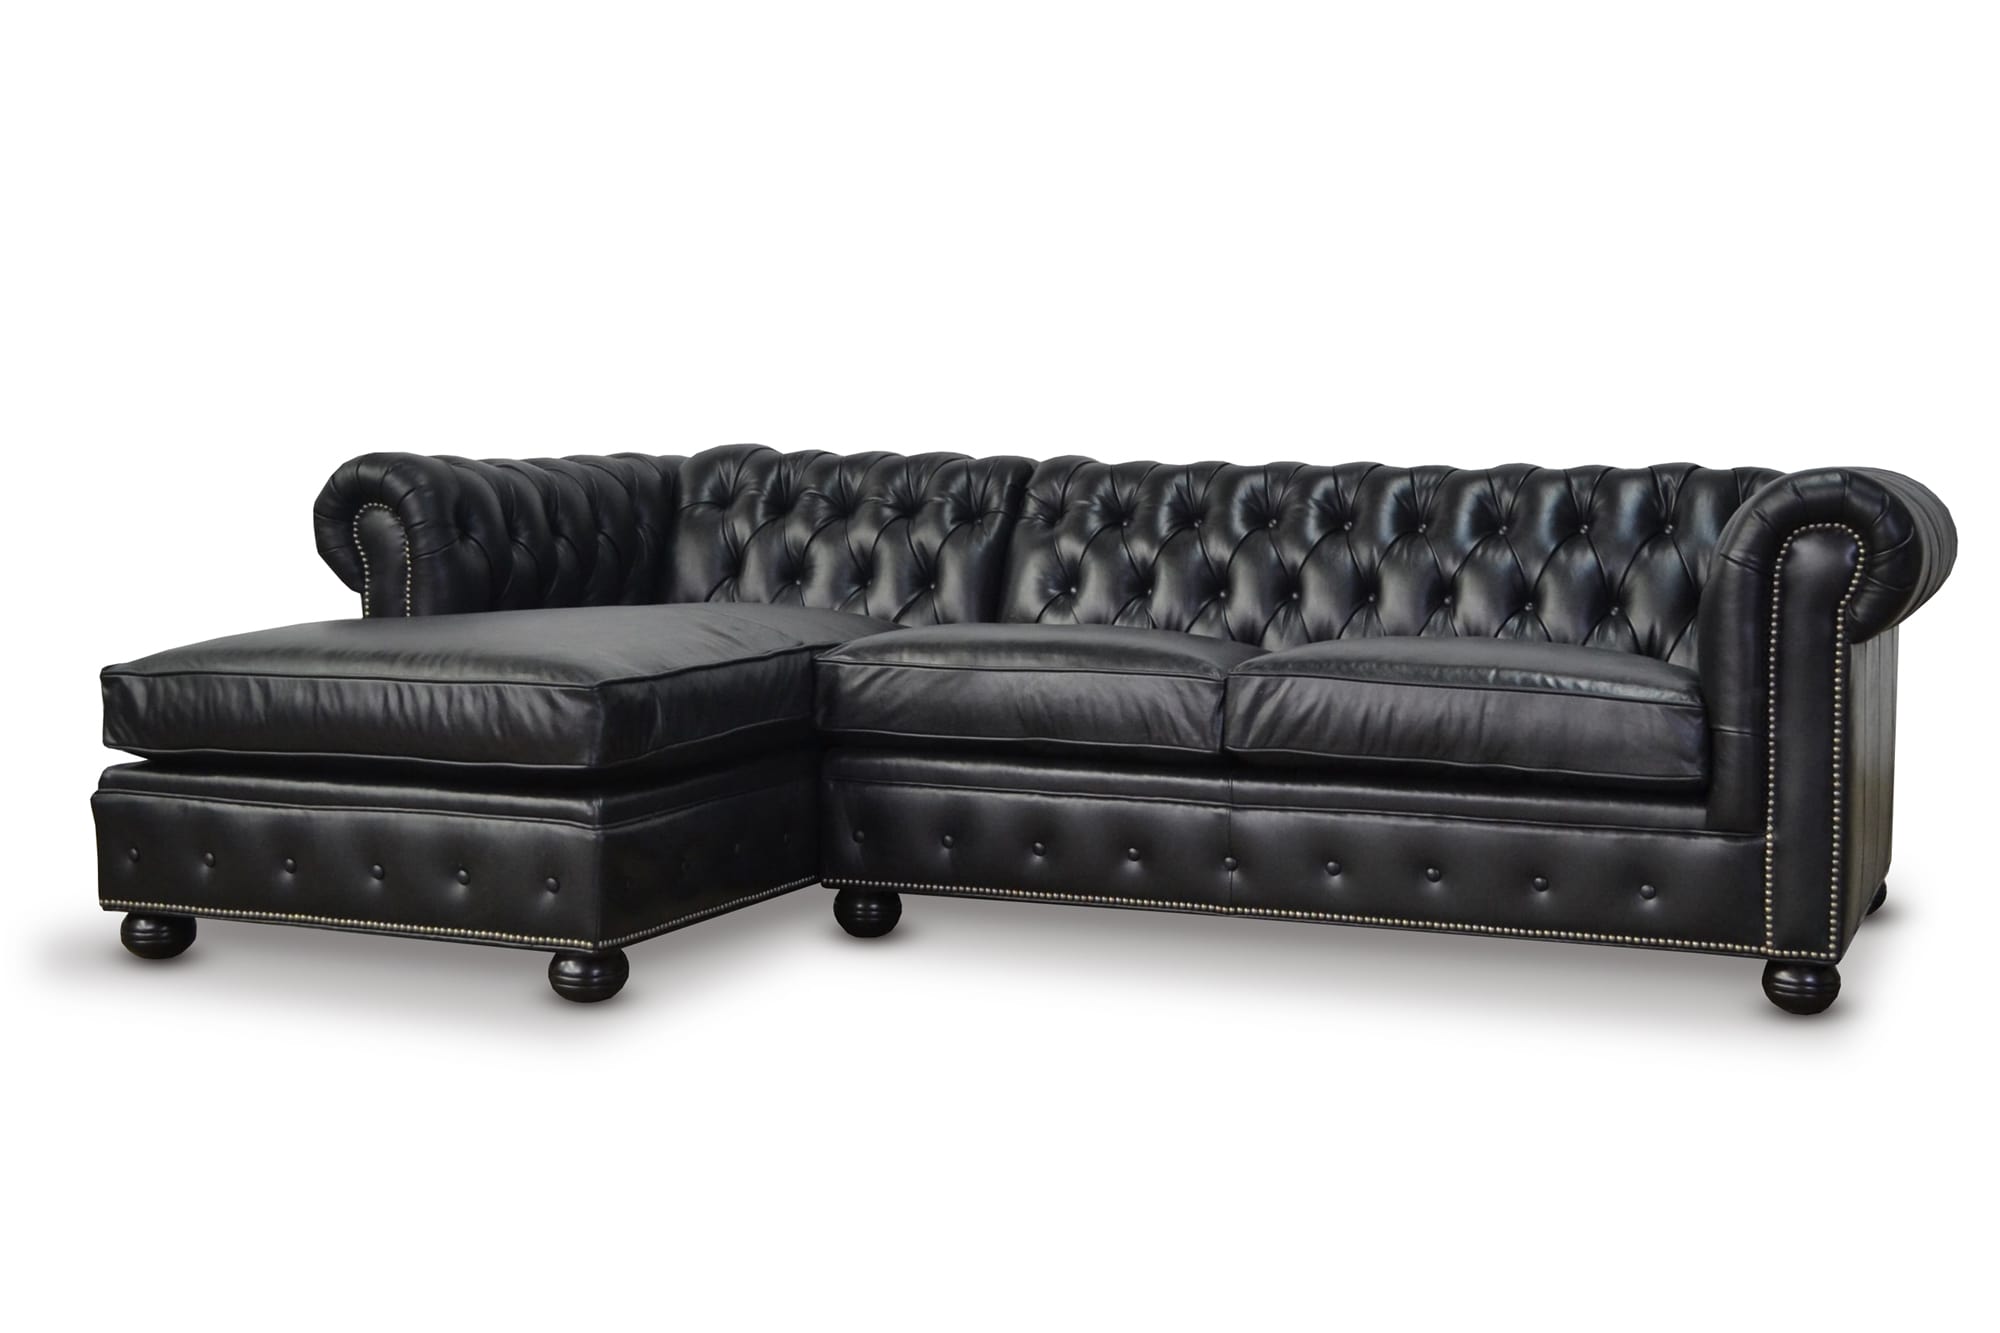 Oiao Irving Chesterfield Chaise Sectional In Vintage Black Leather Min 